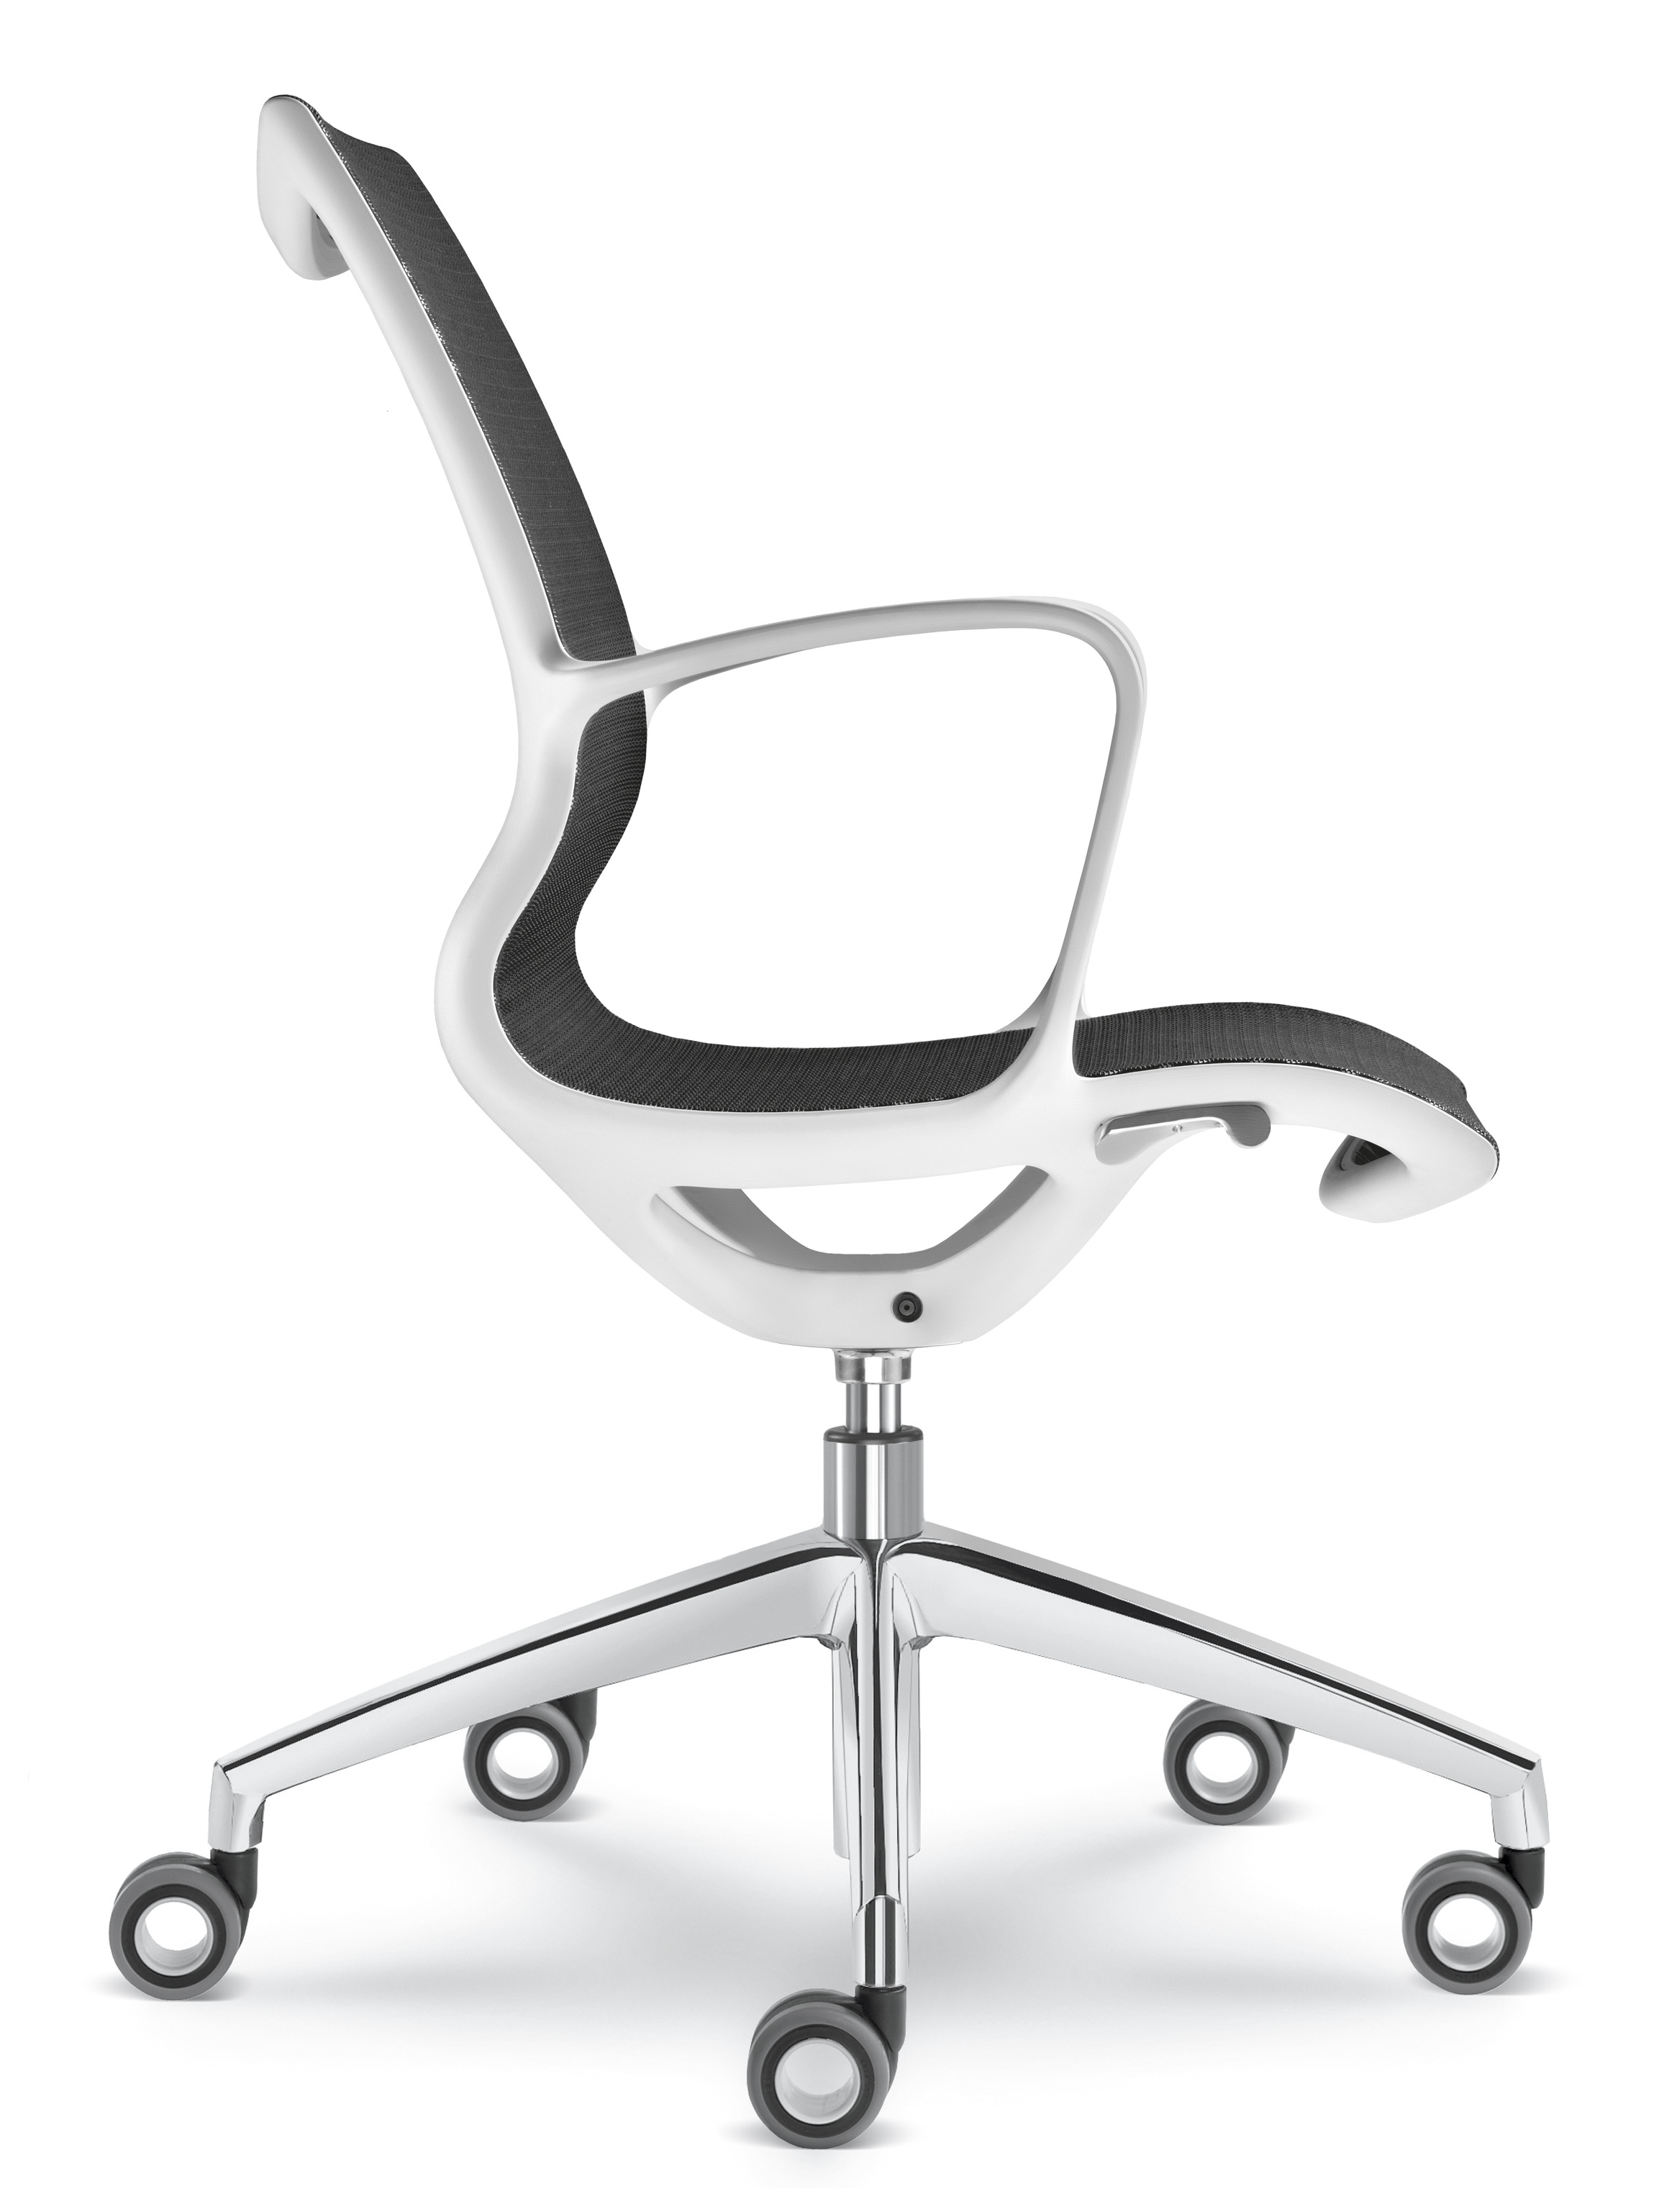 Basic collection. Office Chair with Handles. Inova-ex-operating Chair. LD Seating look.